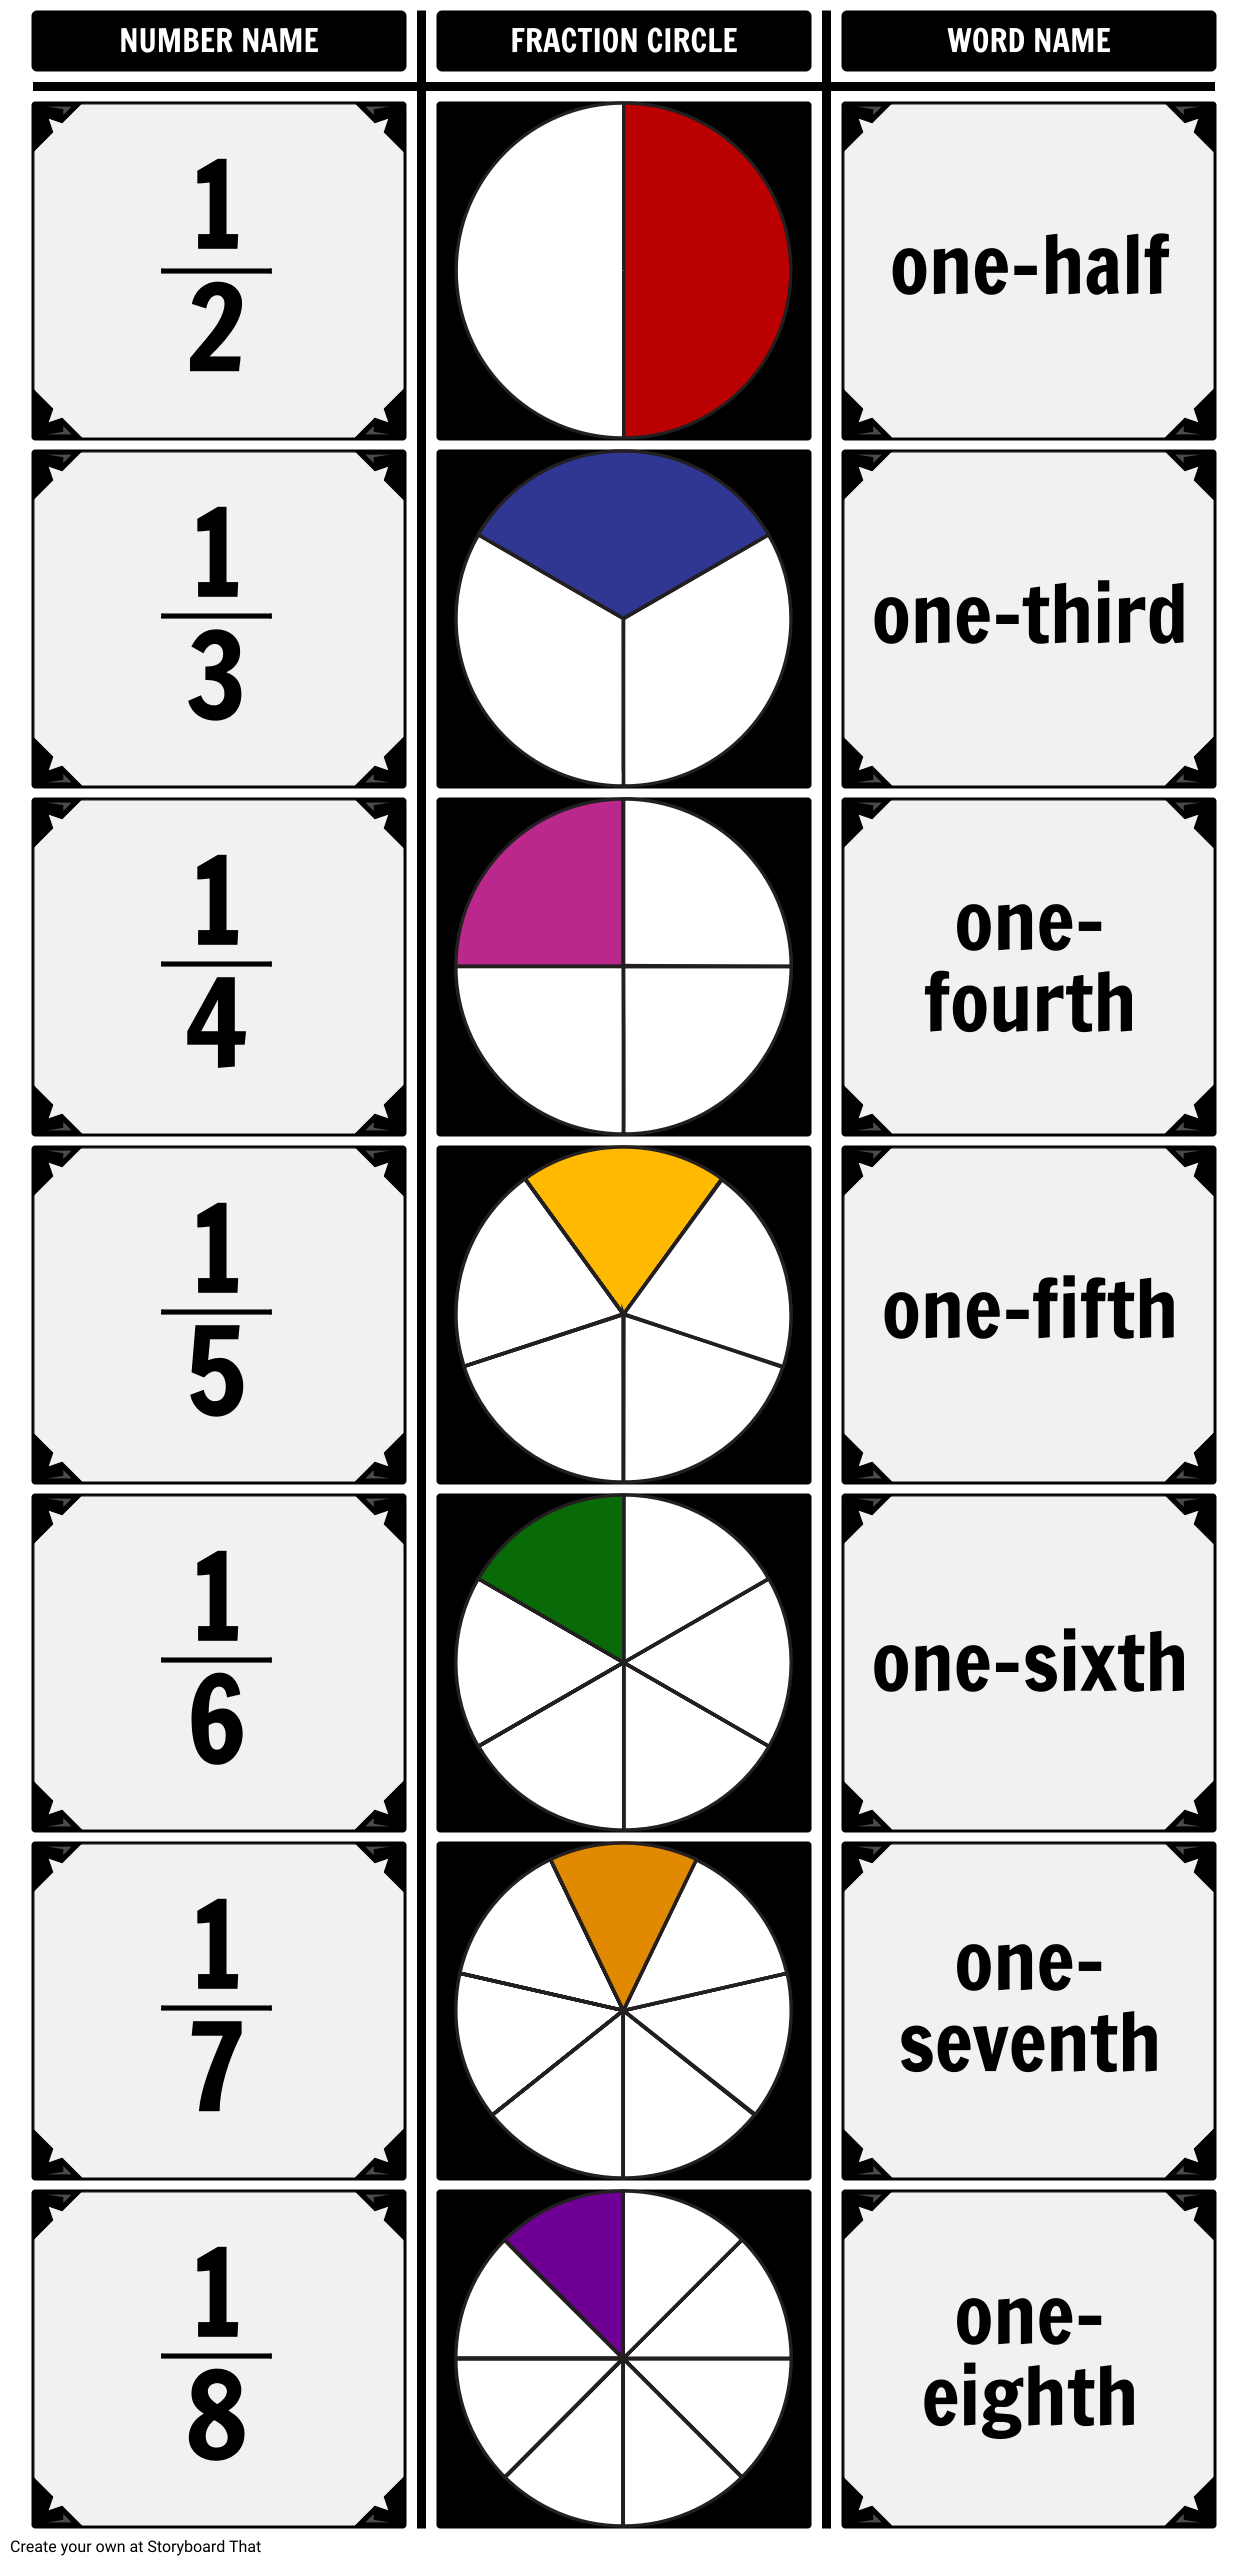 unit-fraction-chart-storyboard-by-anna-warfield